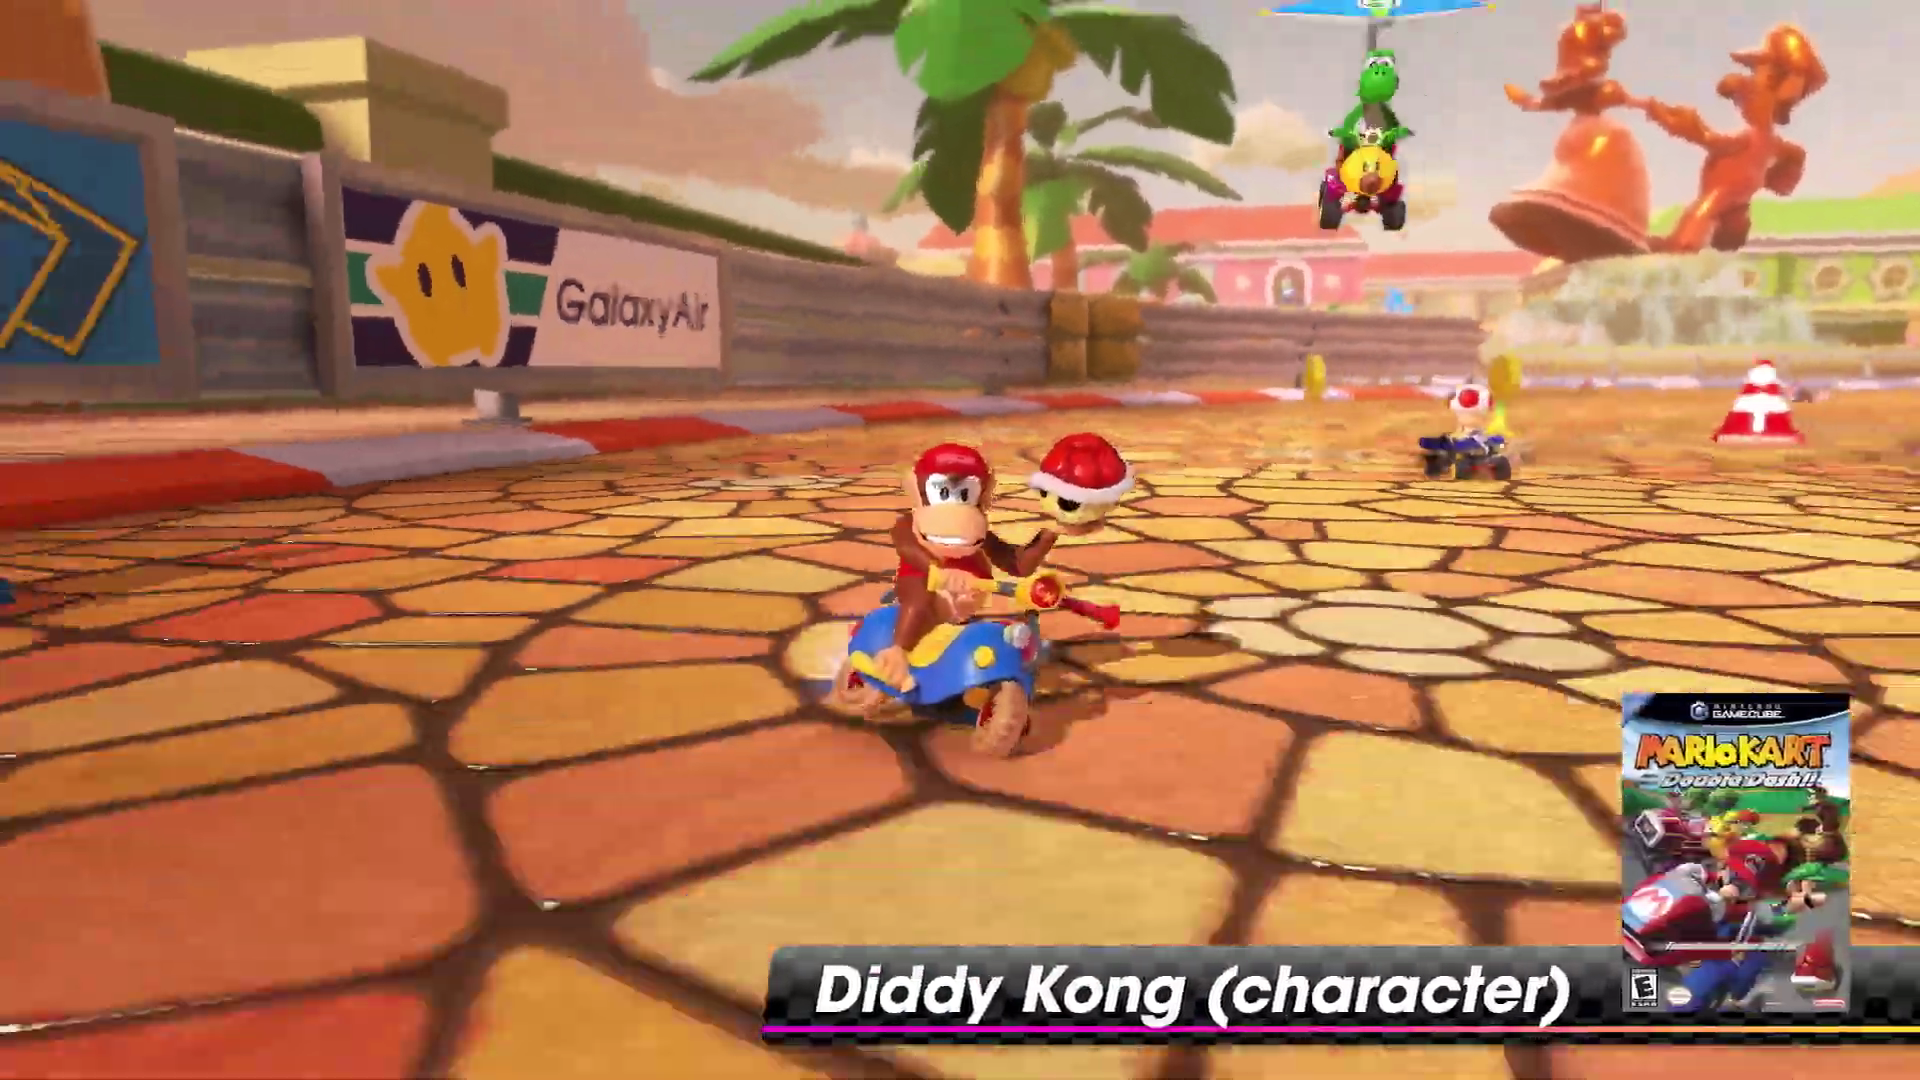 Mario Kart 8 Deluxe - Booster Course Pass Wave 6 - Diddy Kong | Image: Nintendo